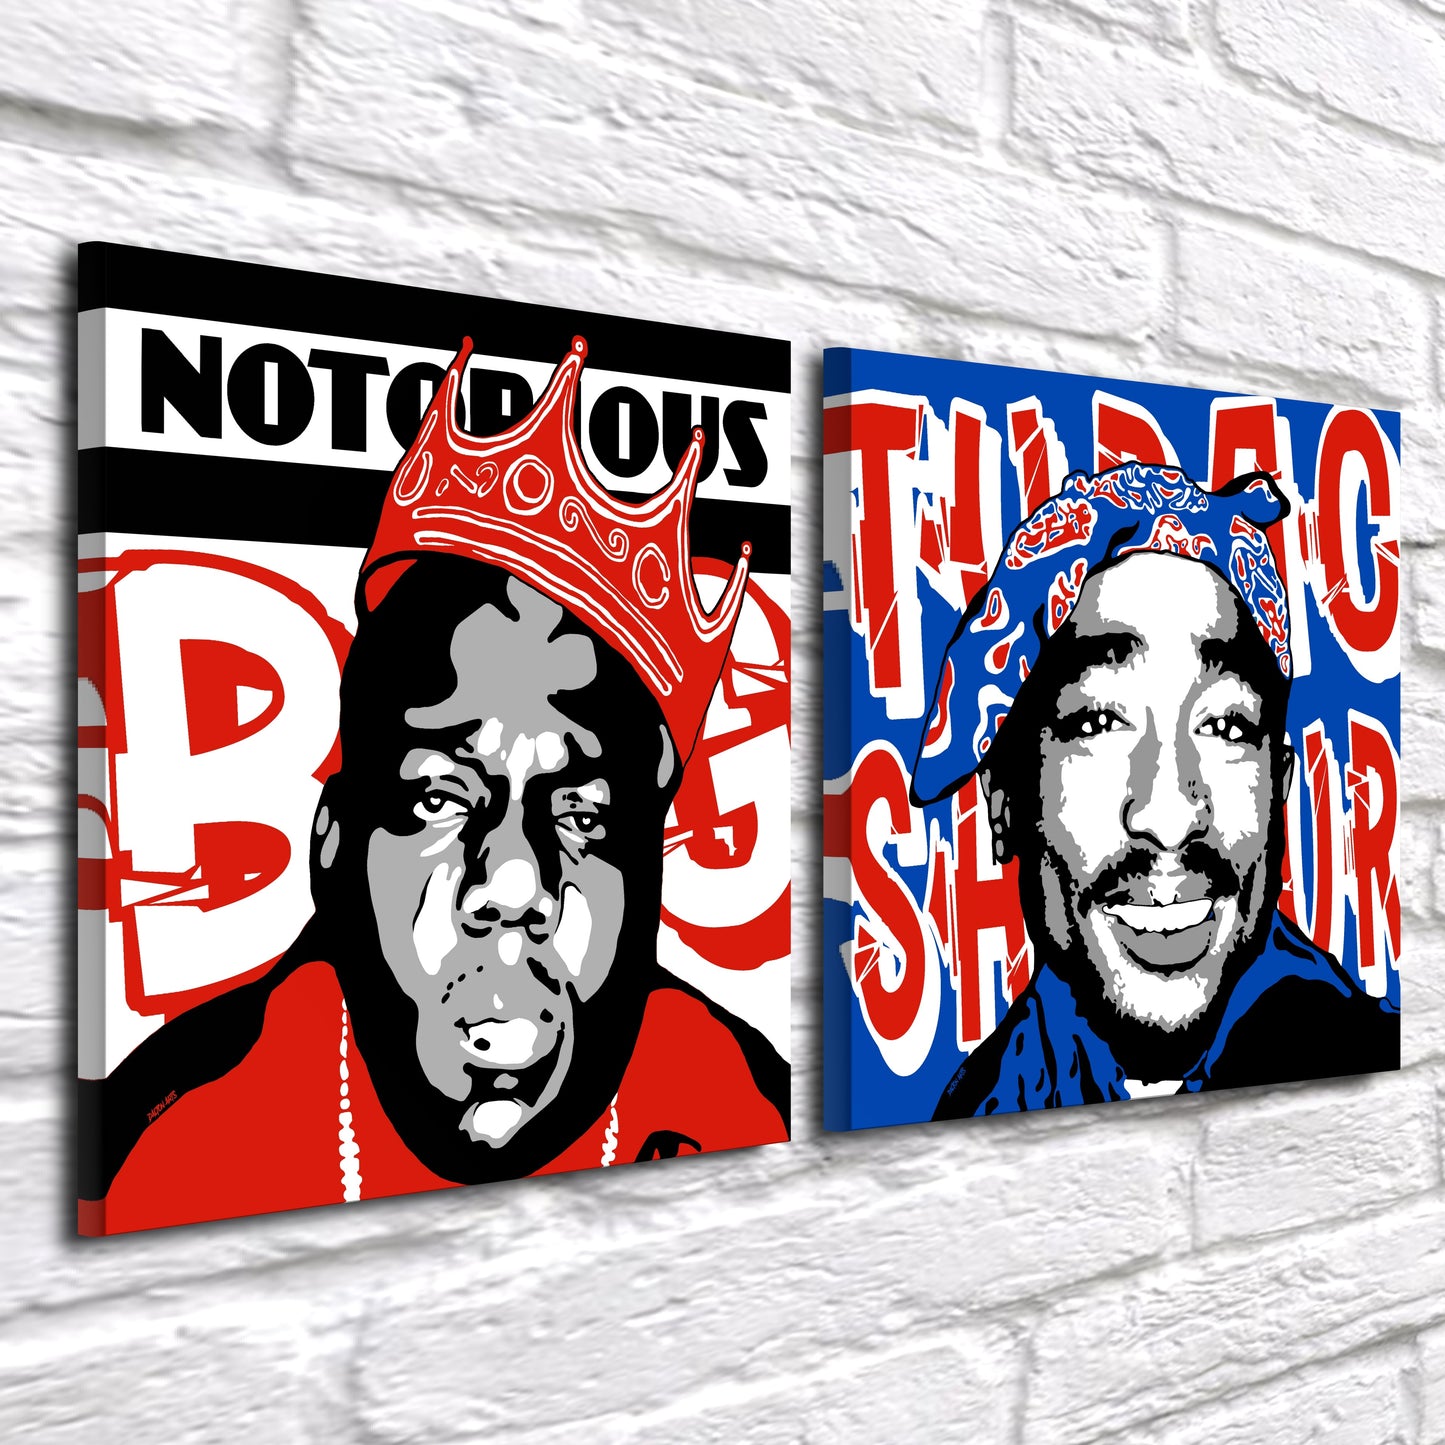 Notorious and B.I.G. Tupac Shakur  'Legends Collide'